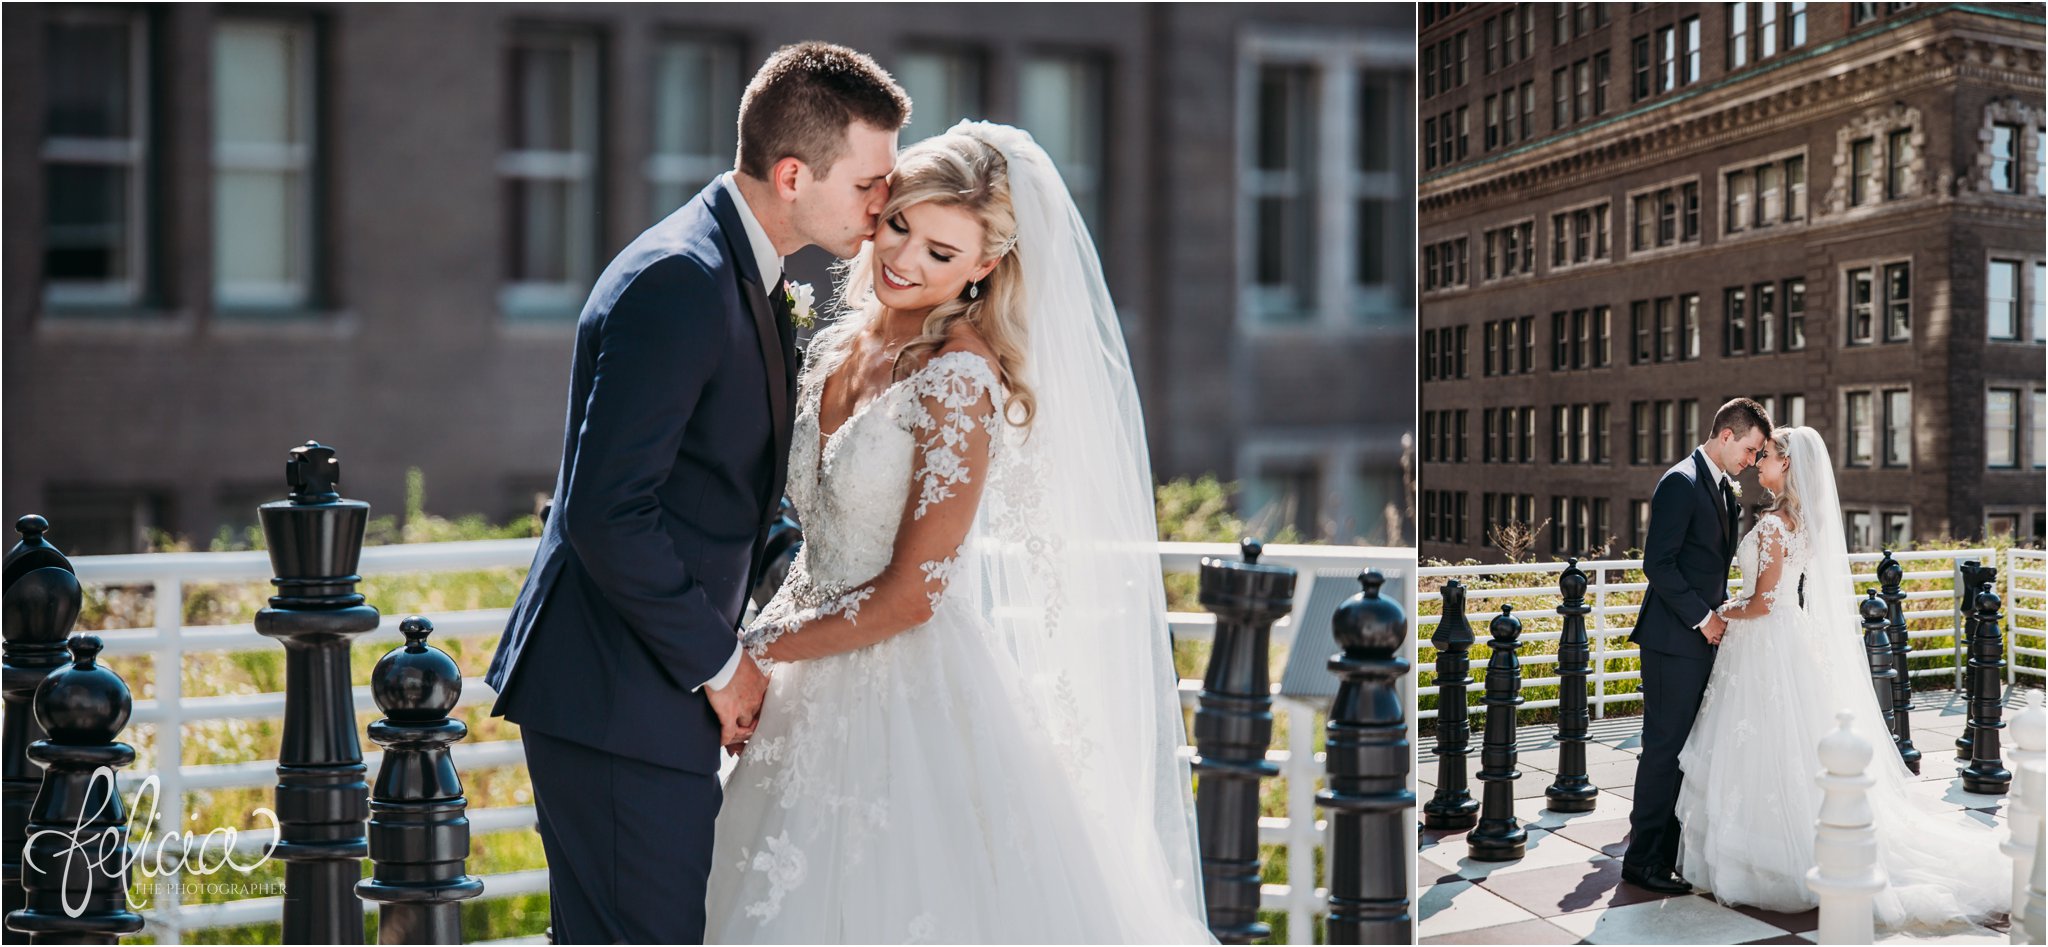 images by feliciathephotographer.com | wedding photographer | kansas city | redemptorist | classic | library | chess board | rooftop | industrial | romantic | portrait | bride and groom | lace long sleeve dress | veil | true love |